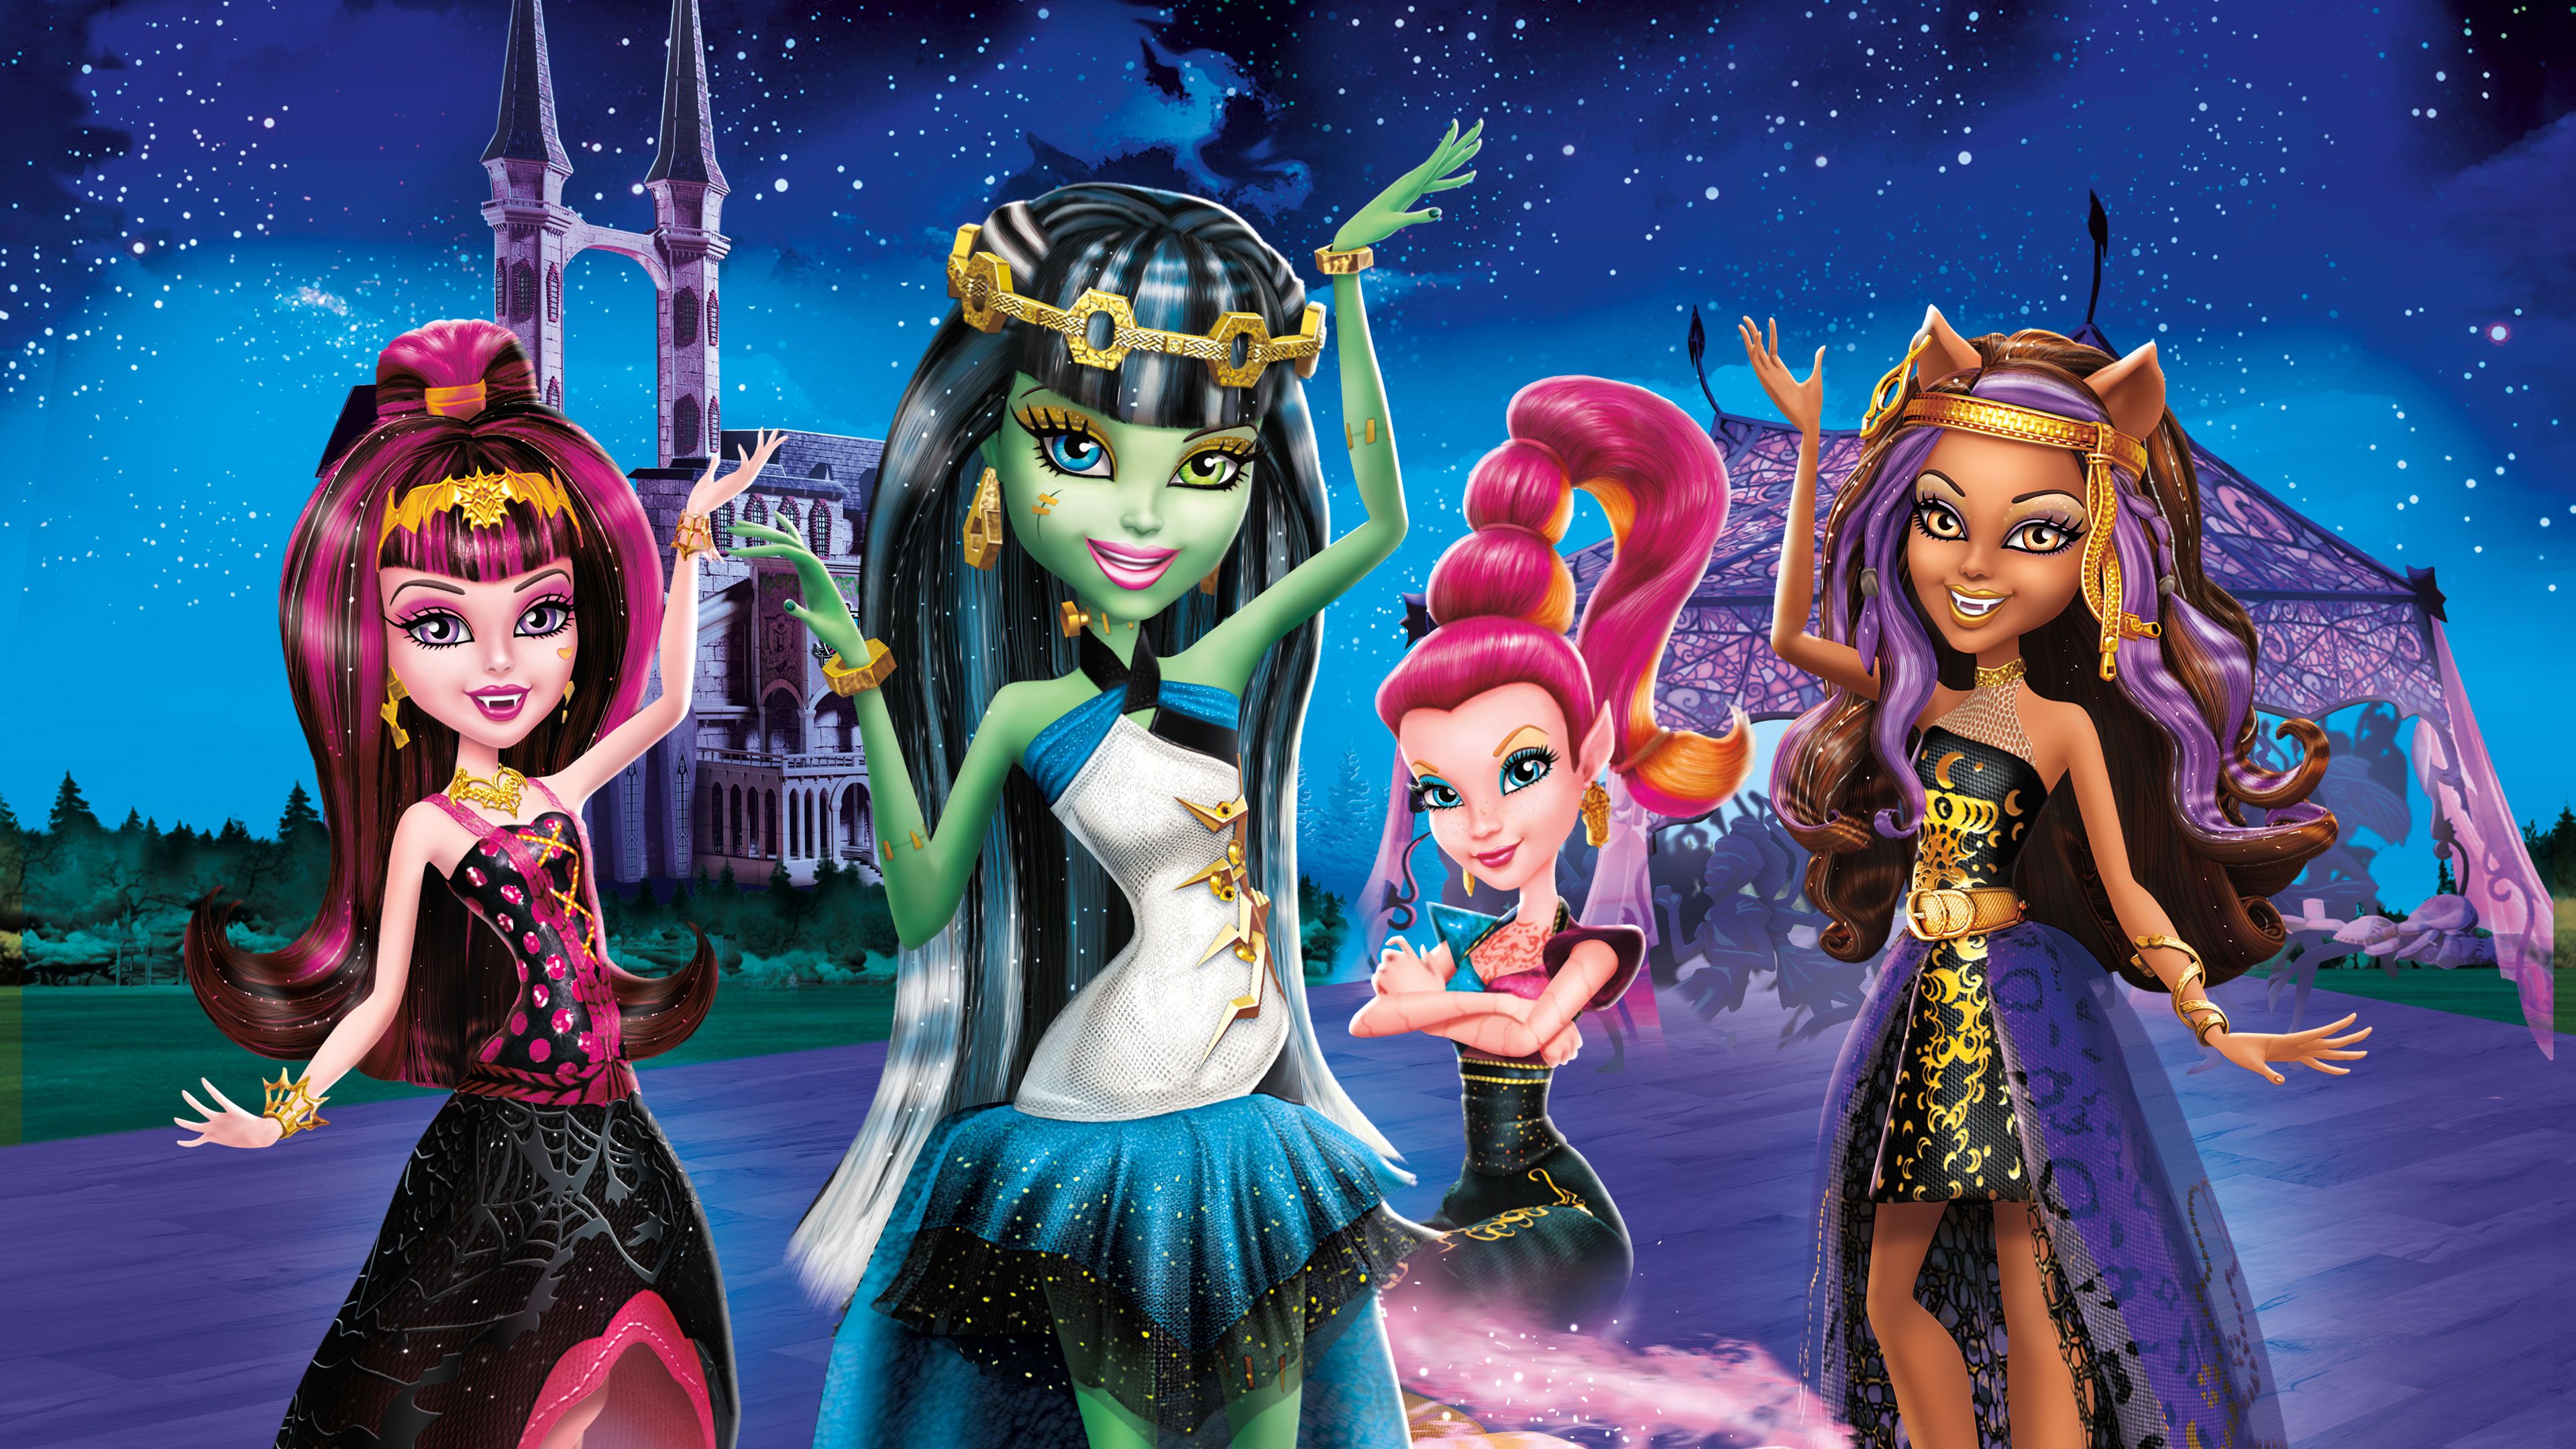 Monster High: 13 Wishes | Movies Anywhere